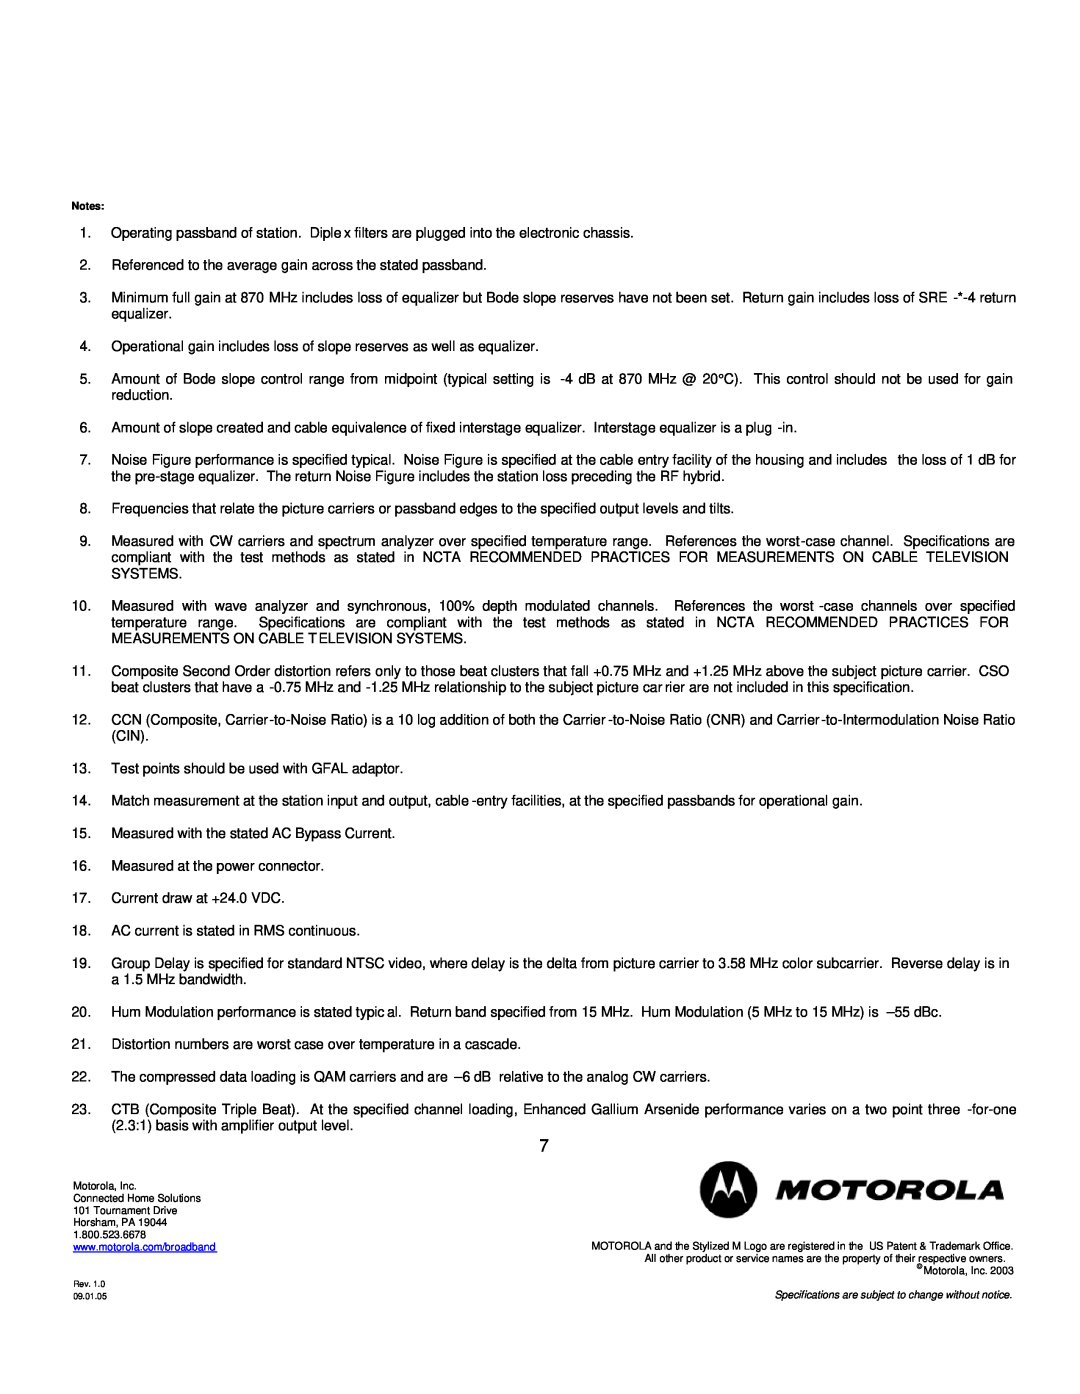 Motorola MB87 specifications Test points should be used with GFAL adaptor 